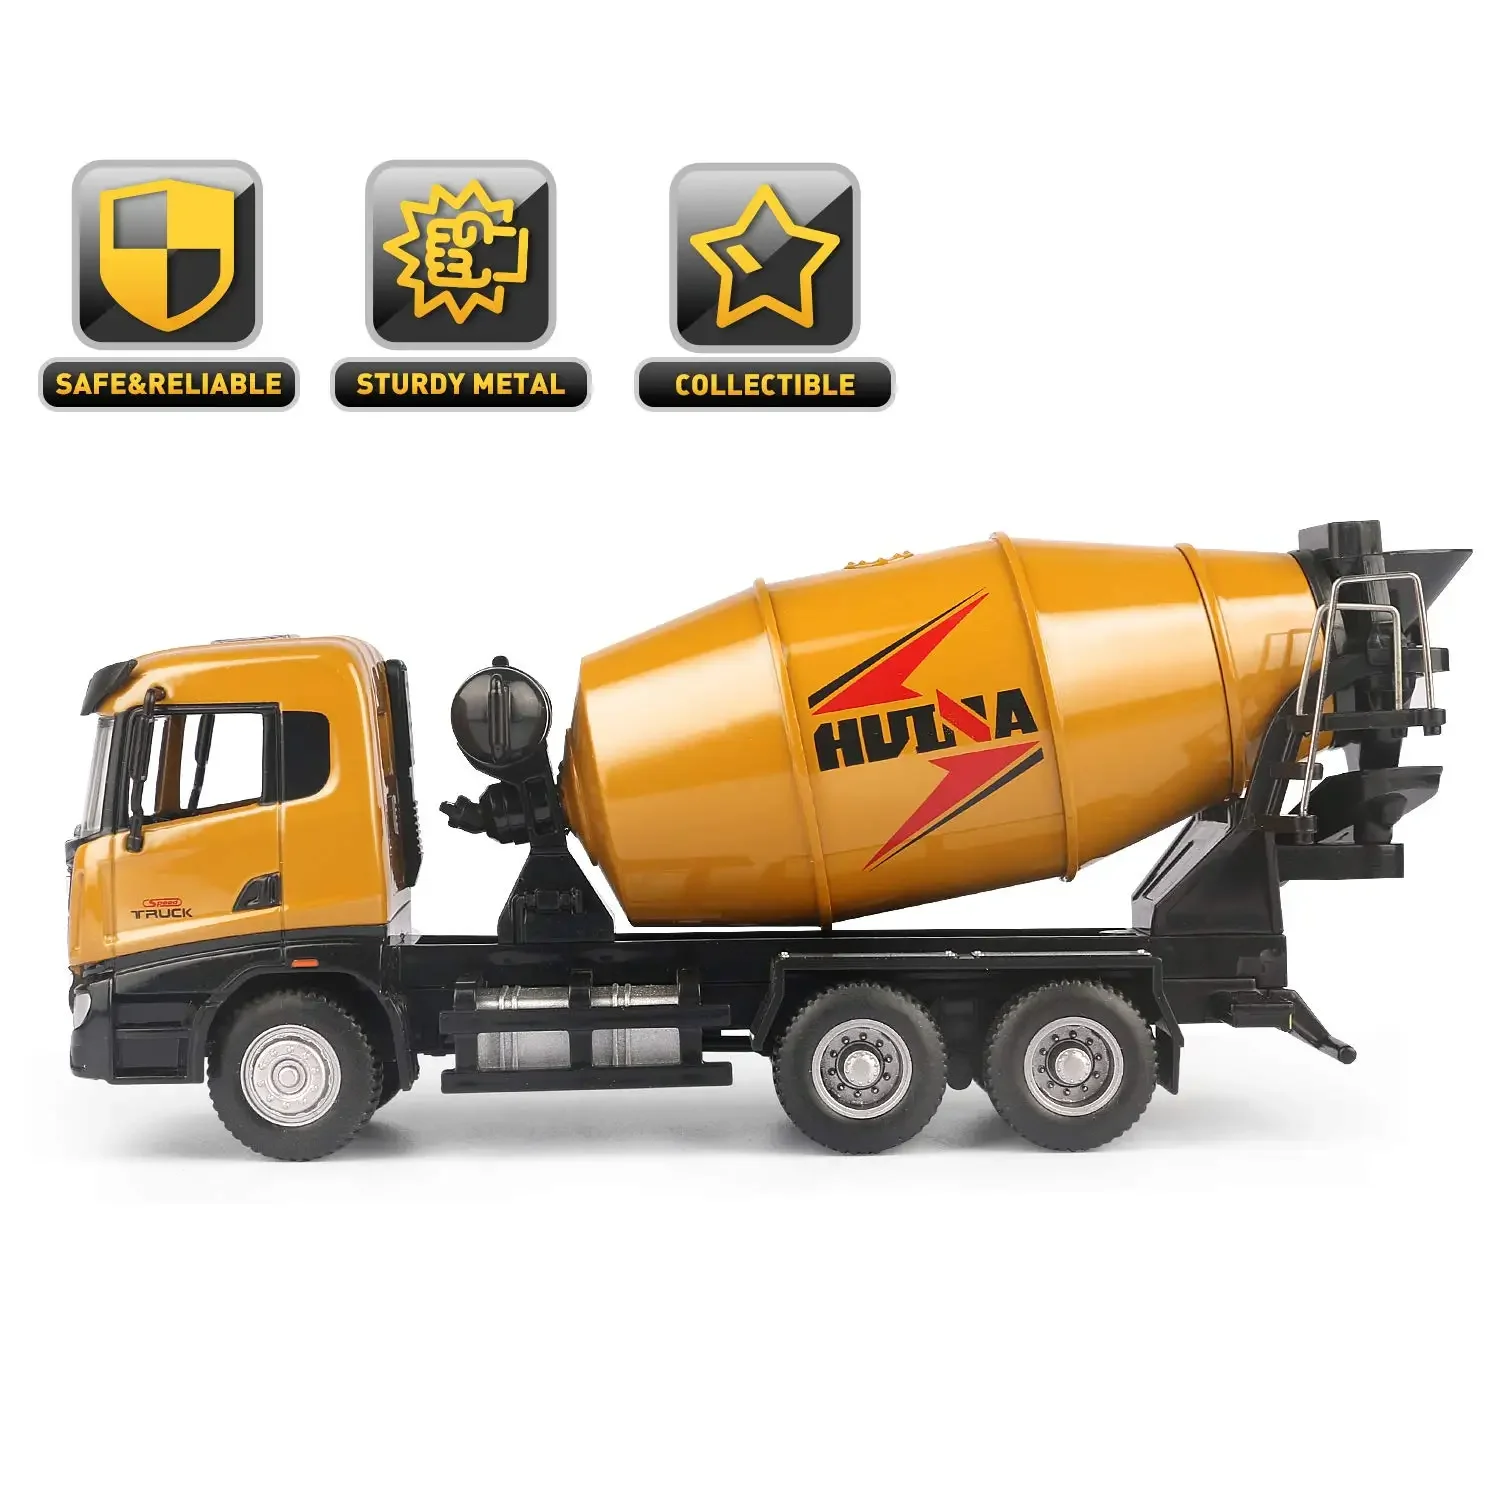 

HUINA 1/50 Simulation Alloy Mixer Truck Model Sliding Engineering Heavy Vehicle Rotation Discharge Car Toy for Chlidren's Gifts